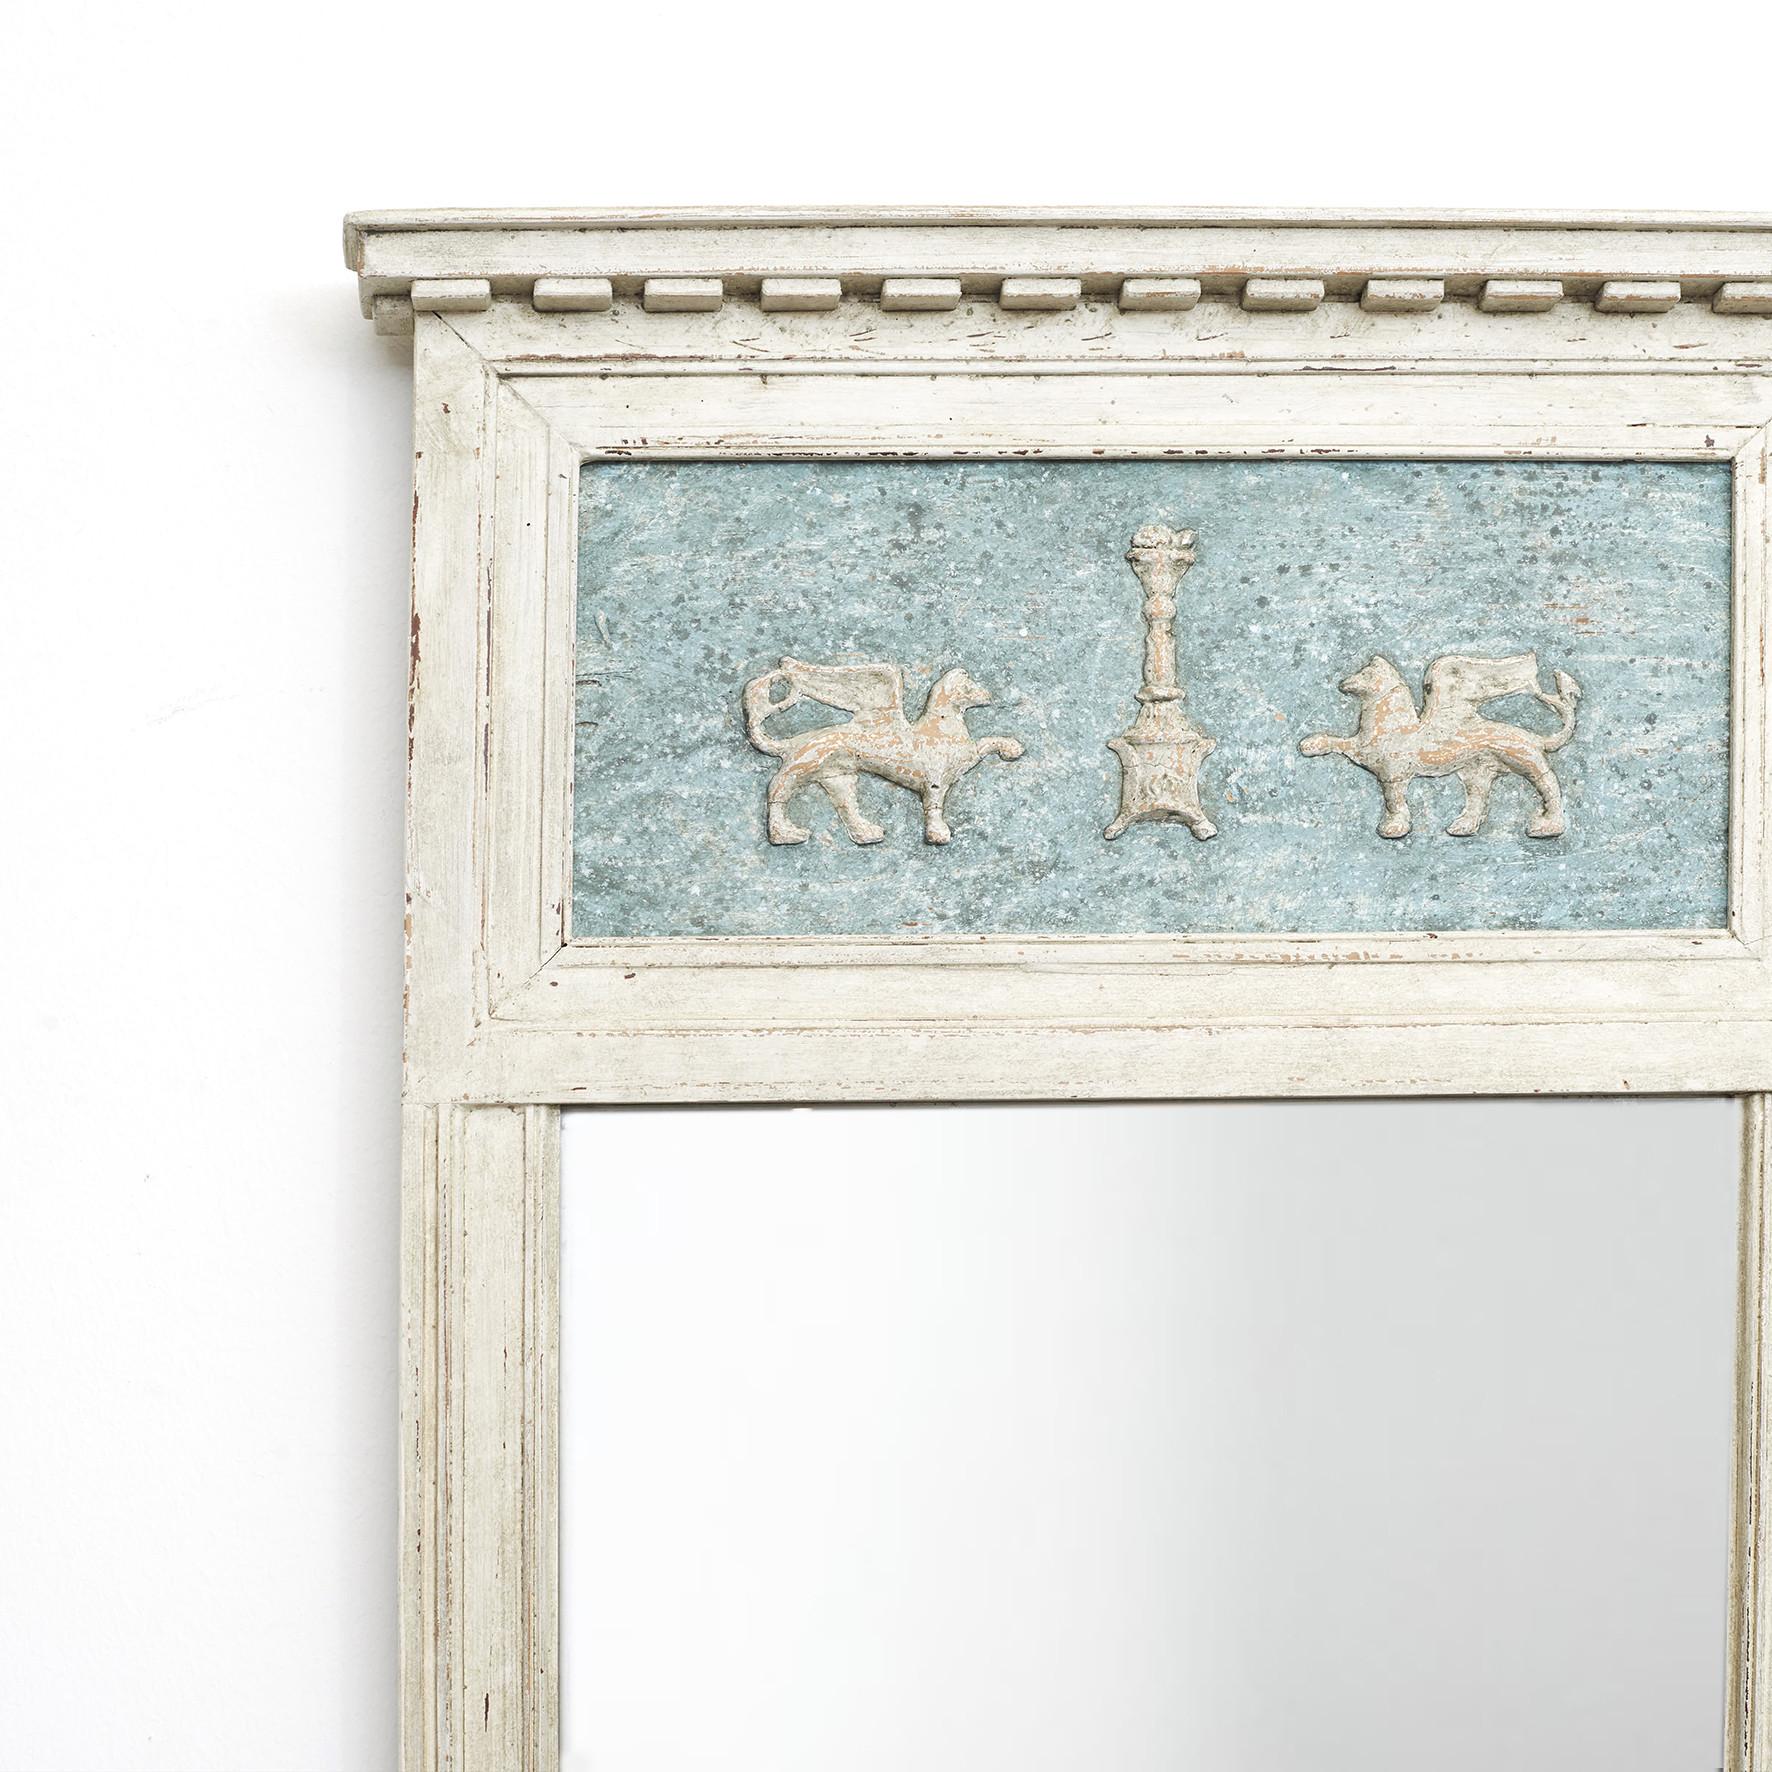 Pair of elegant and decorative Gustavian mirrors.
Later professionally repainted in antique blue and gray colors. Adorned with fabulous animals and garlands.
Sweden, circa 1810
Sold as a pair.